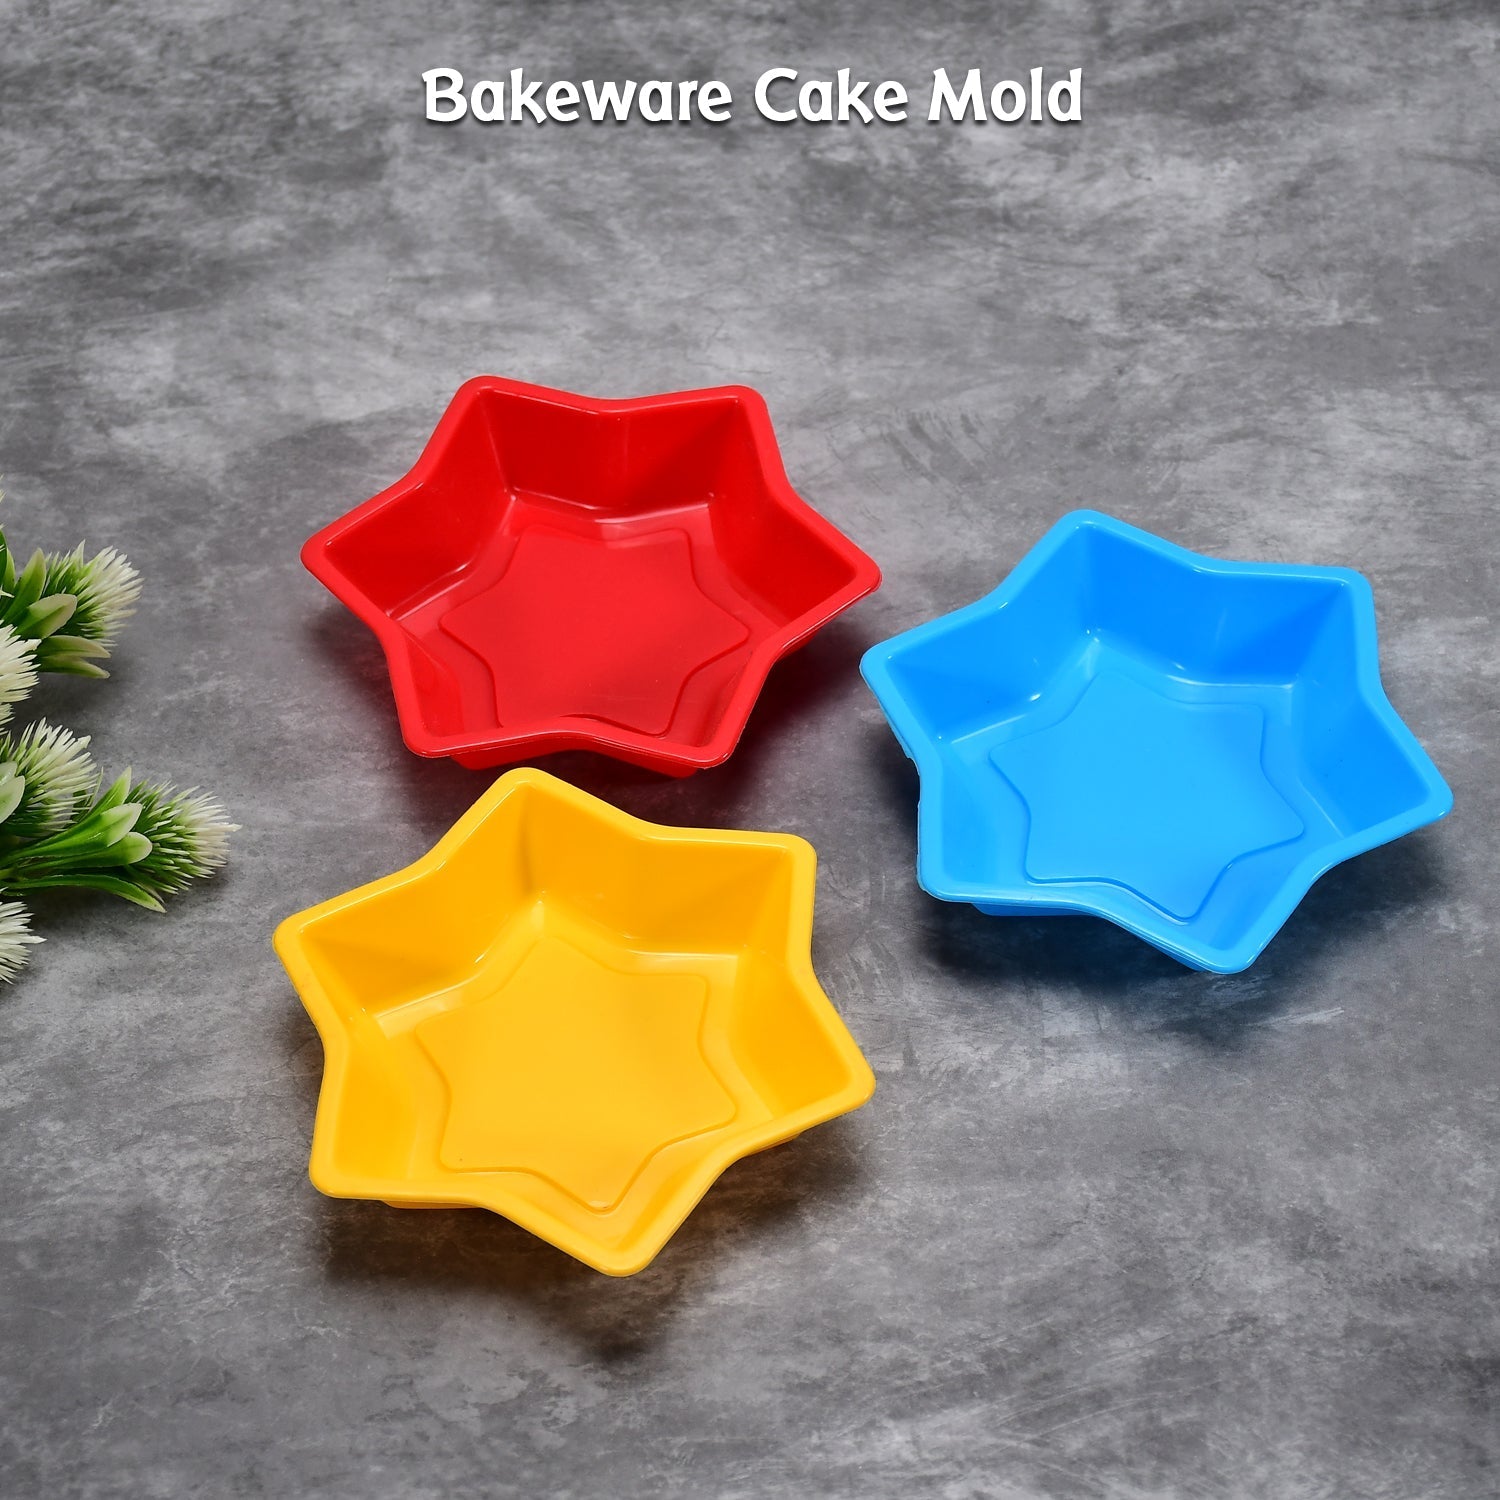 2725 Silicone Resin Mold Star Shape Full Flexible Mould 